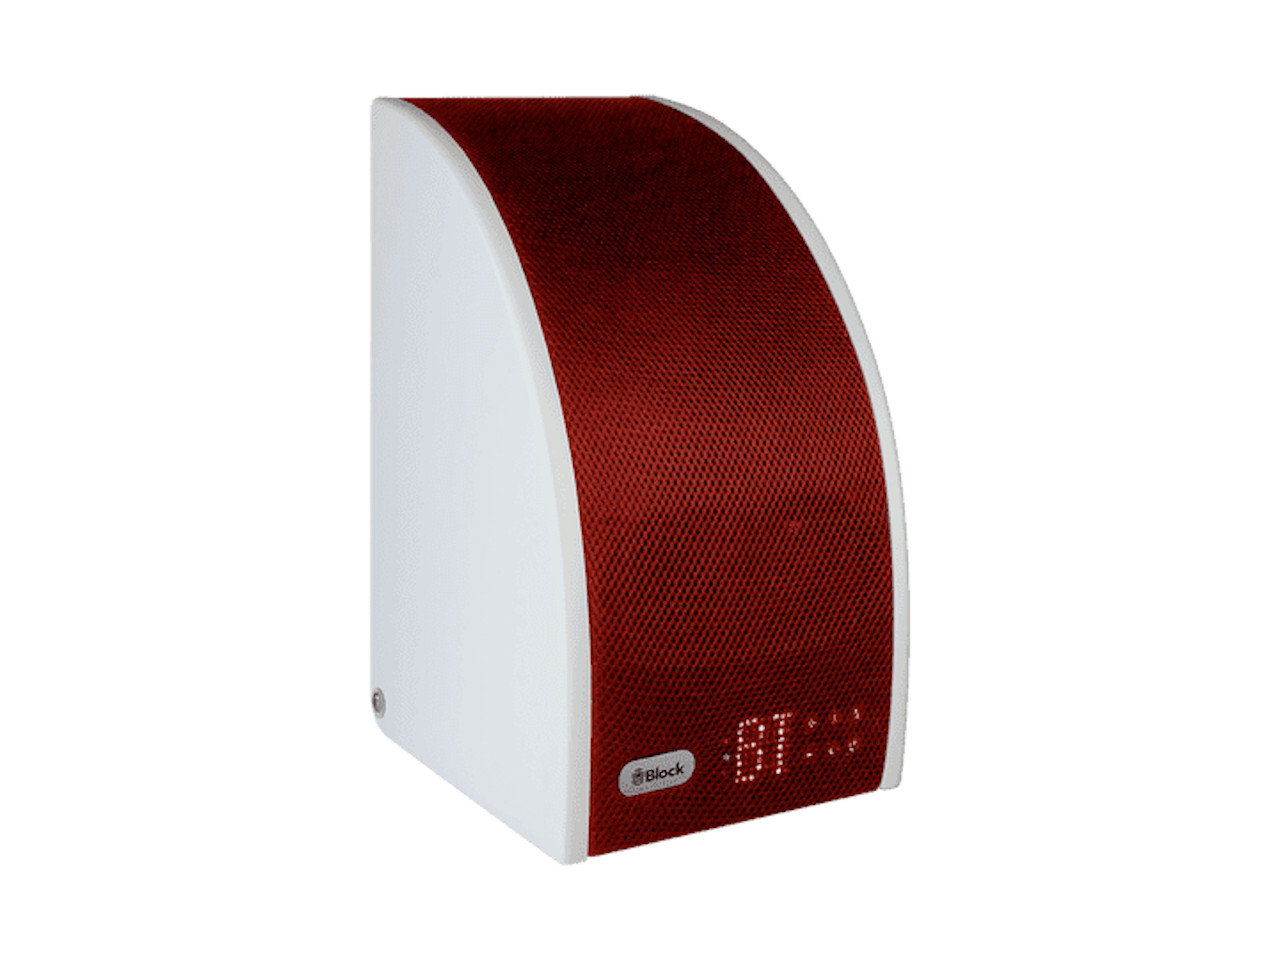 Block SB-200 Weiss/Rot (discontinued)